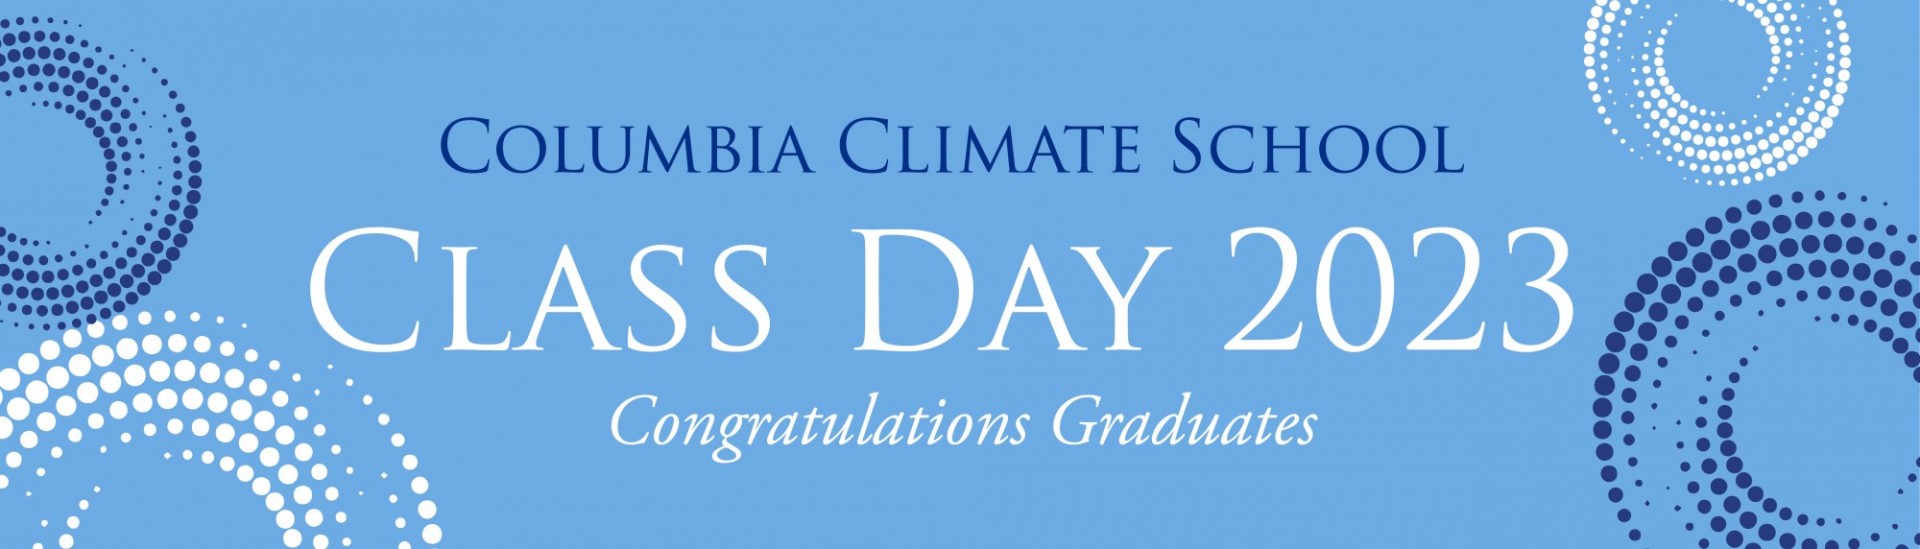 Columbia Climate School Class Day 2023